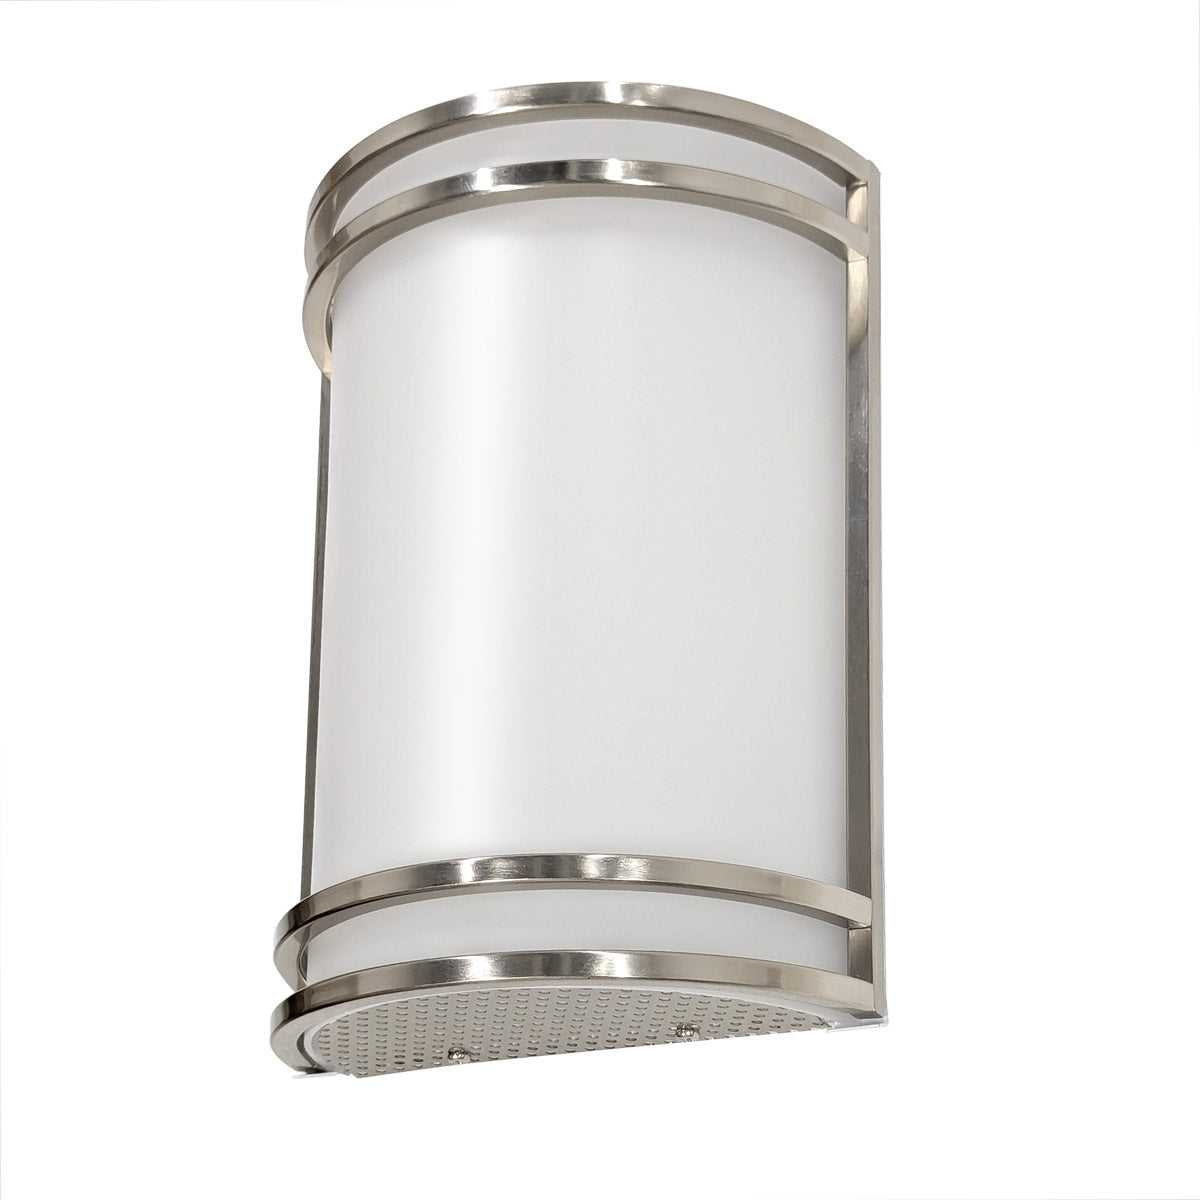 Brushed Nickel Wall Sconce with Selectable CCT